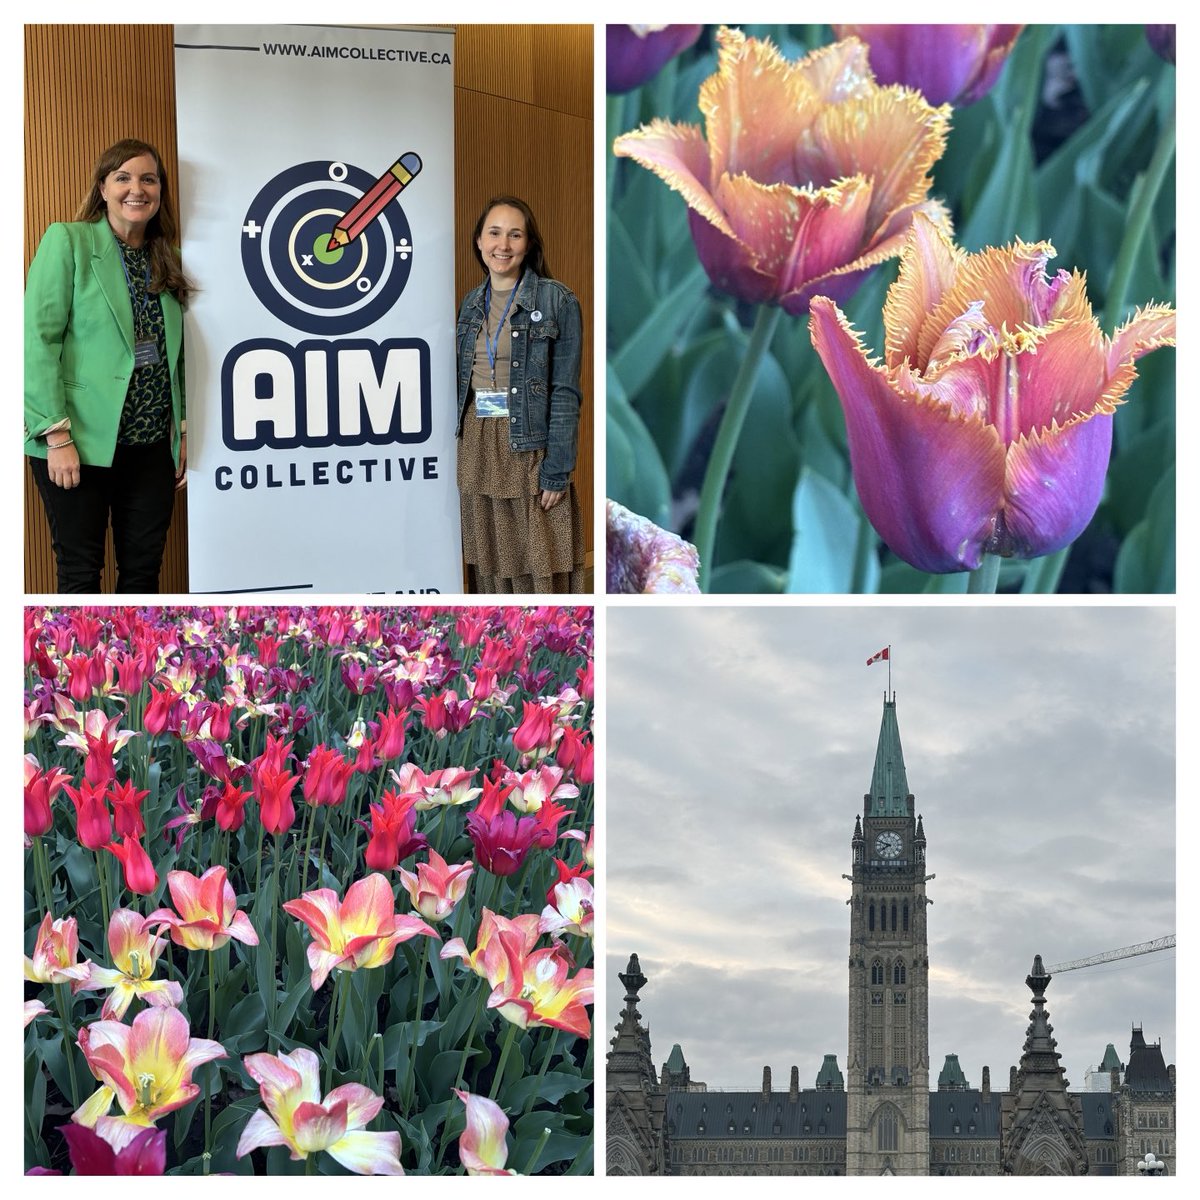 What a wonderful few #math days with ⁦@AIMCollectiveCA⁩ in Ottawa! So many great conversations with passionate educators and researchers. It was fun to have ⁦@MsHardy123⁩ from ⁦@utexascoe⁩ on the trip, and it was nice timing with the tulip festival!